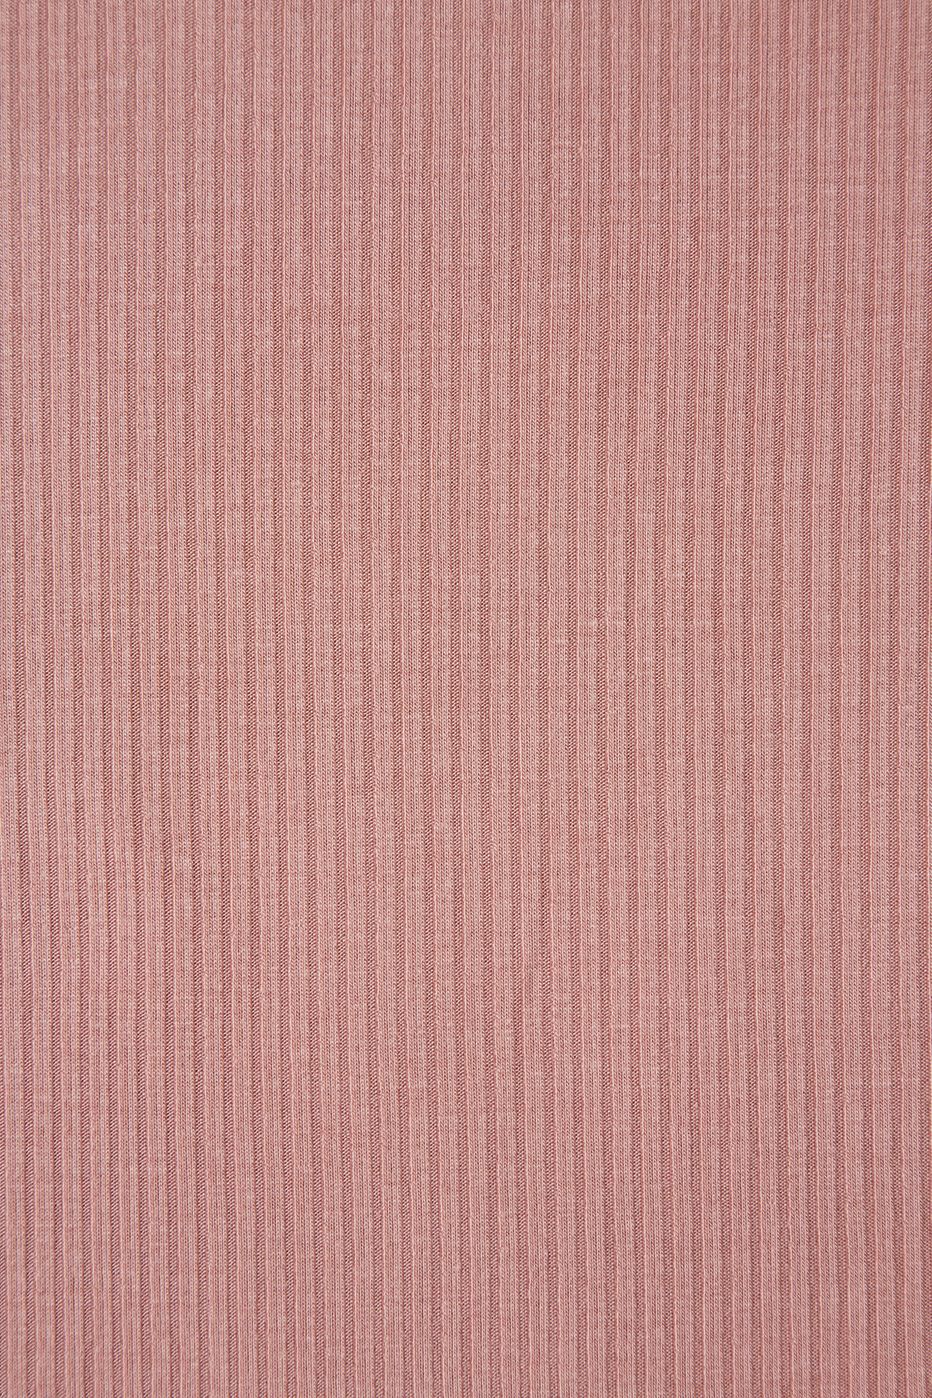 Derby ribbed jersey in puff (rosé) - FinasIdeen